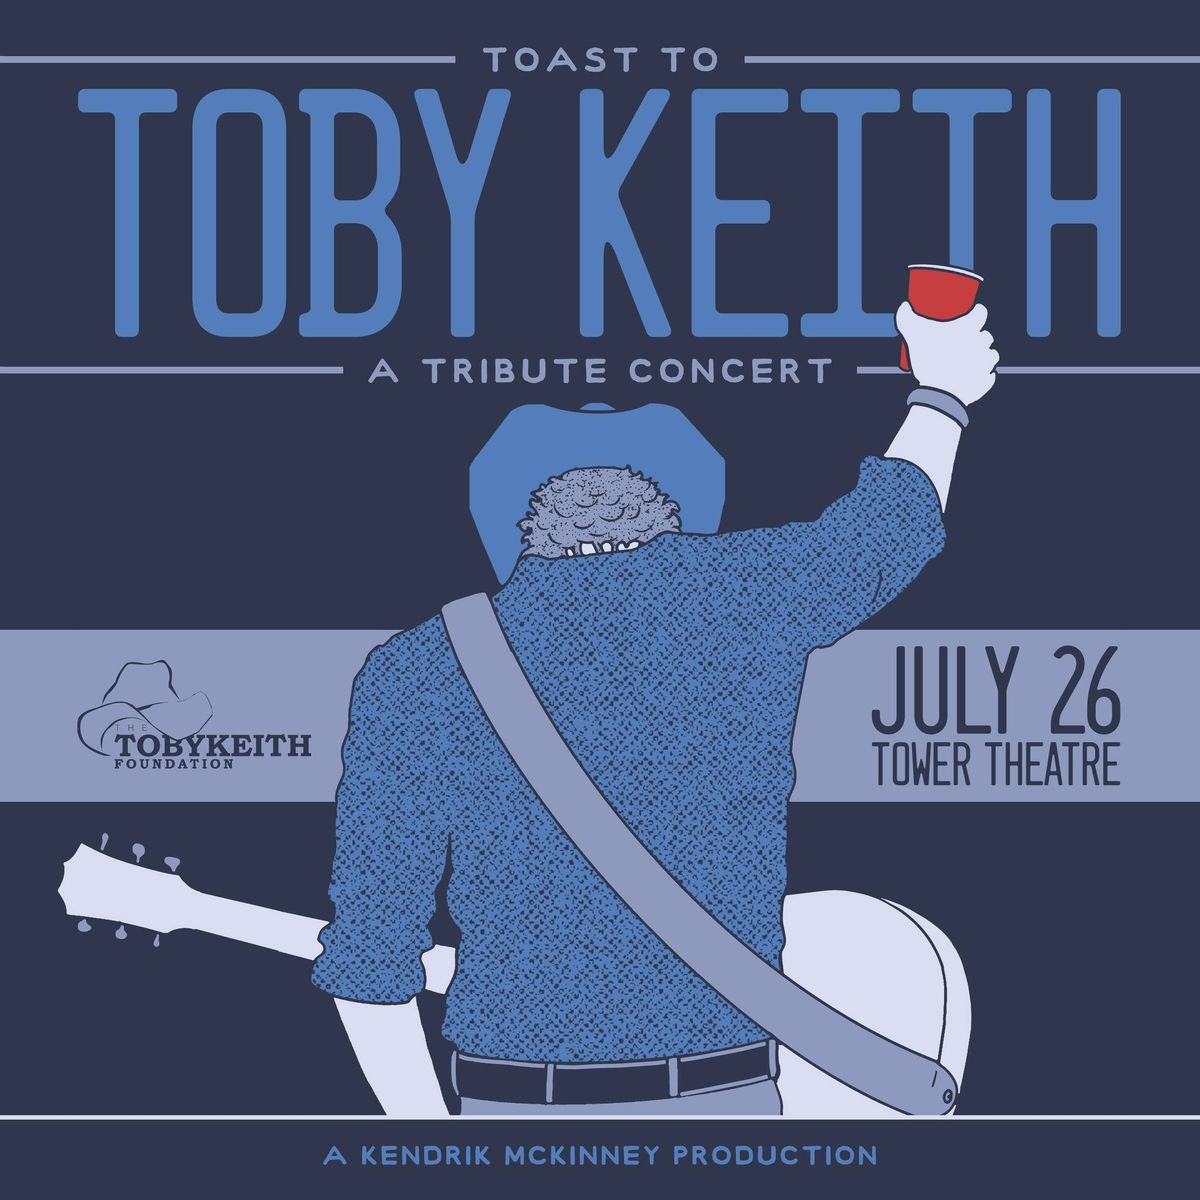 Toast to Toby Keith: A Tribute Concert & Kendrik McKinney Production